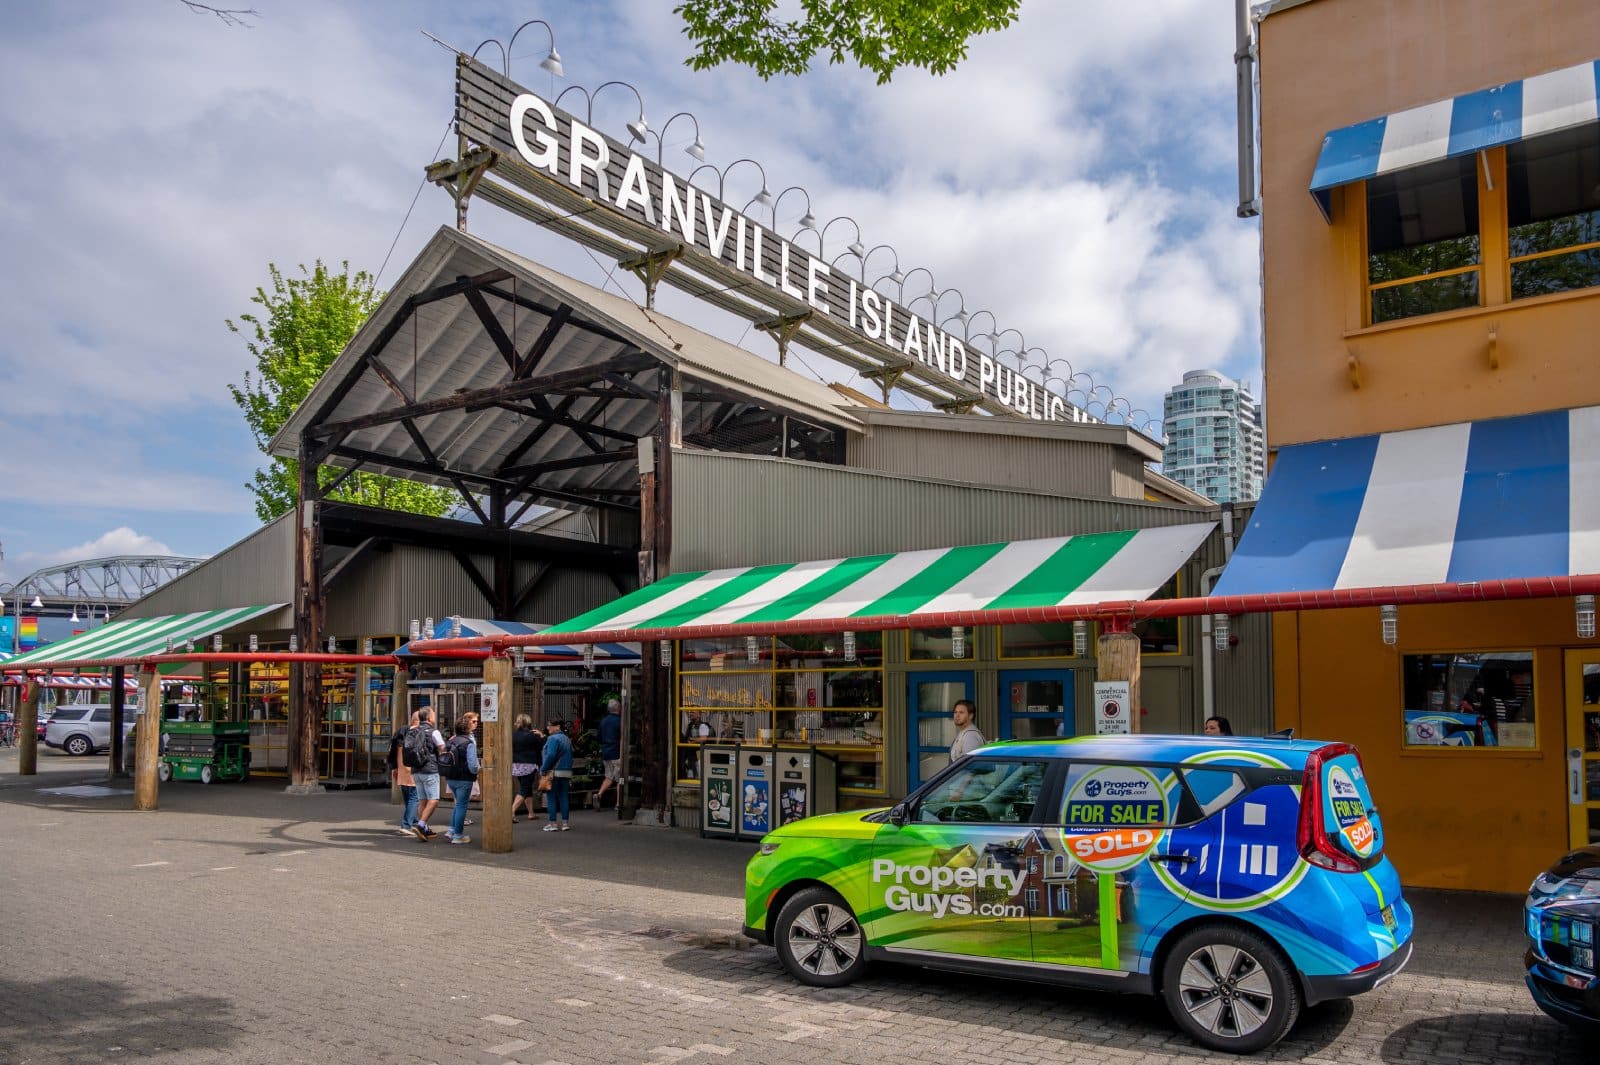 <p class="wp-caption-text">Image Credit: Shutterstock / Jeff Whyte</p>  <p><span>Nestled under the Granville Street Bridge, Granville Island Public Market is a bustling cultural hub known for its vibrant atmosphere, diverse vendors, and waterfront views. This culinary paradise offers fresh, locally sourced produce, artisanal foods, and unique handicrafts. Beyond the market, Granville Island is home to numerous art galleries, studios, and performance venues, making it a cornerstone of Vancouver’s creative community.</span></p>